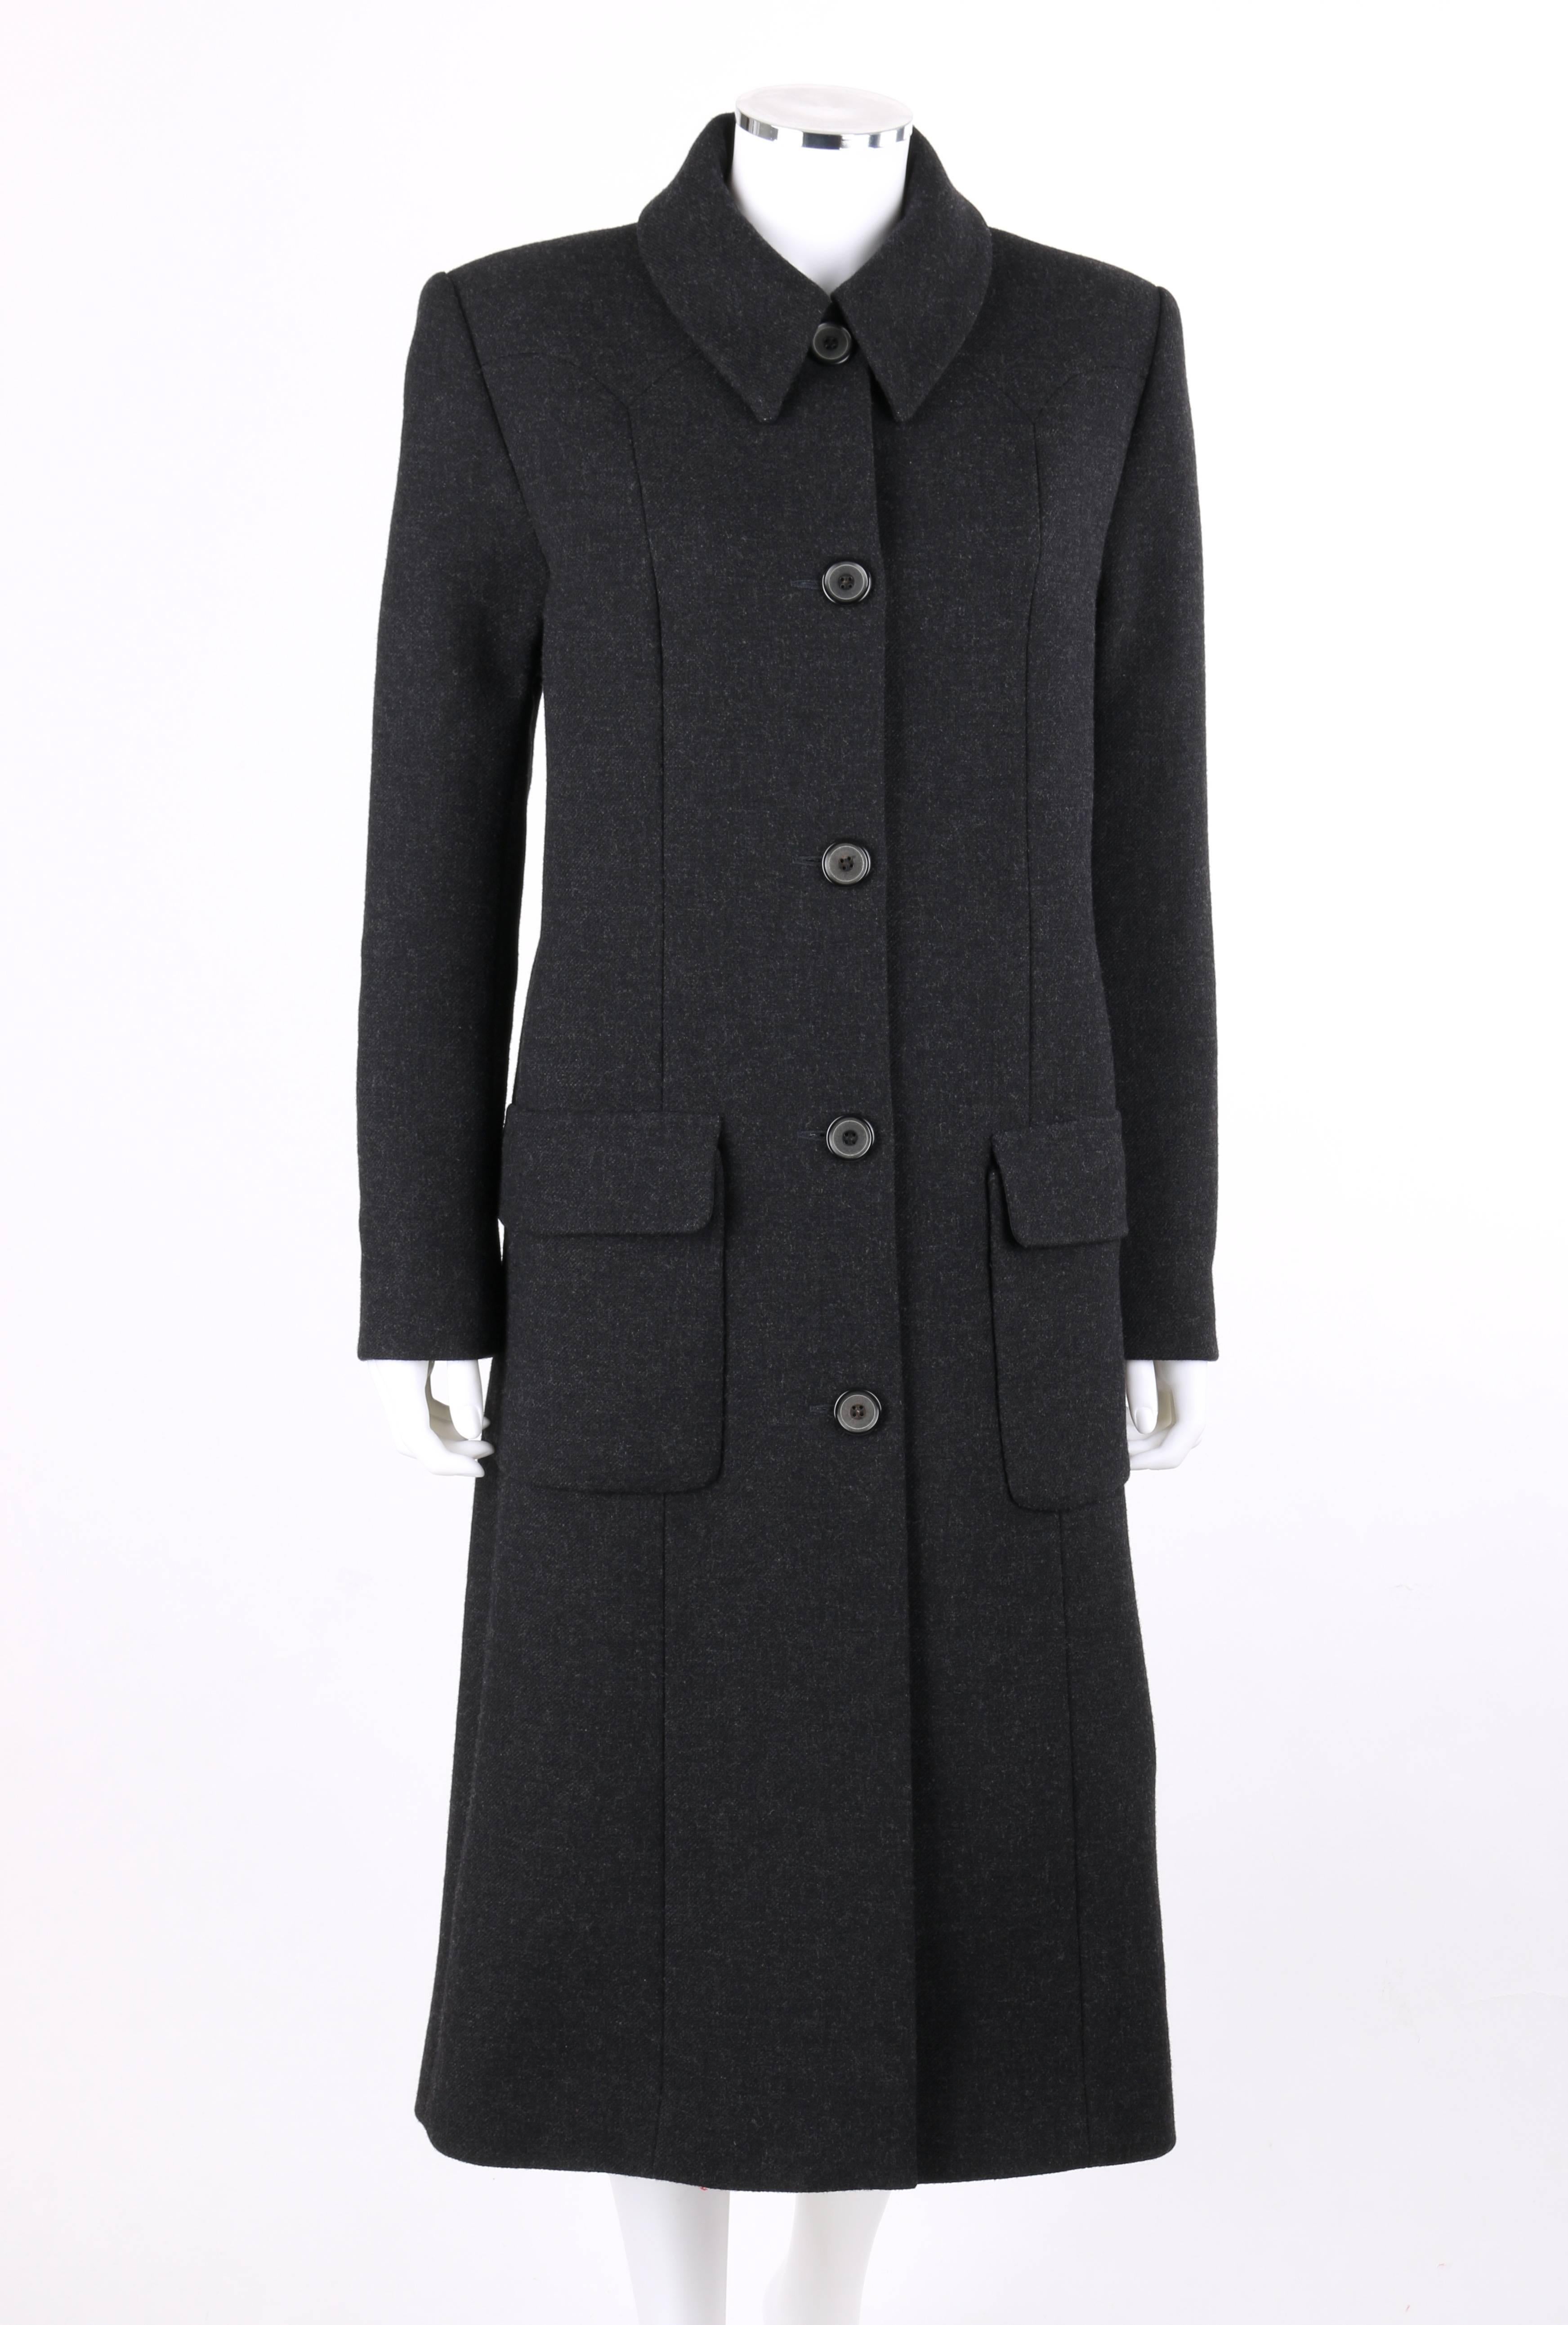 Givenchy Couture Autumn/Winter 1998 charcoal gray wool overcoat designed by Alexander McQueen. Long sleeves. Bal collar. Five center front button closures with single snap closure at top. Front pointed yoke. Two large patch pockets with flaps. Fully